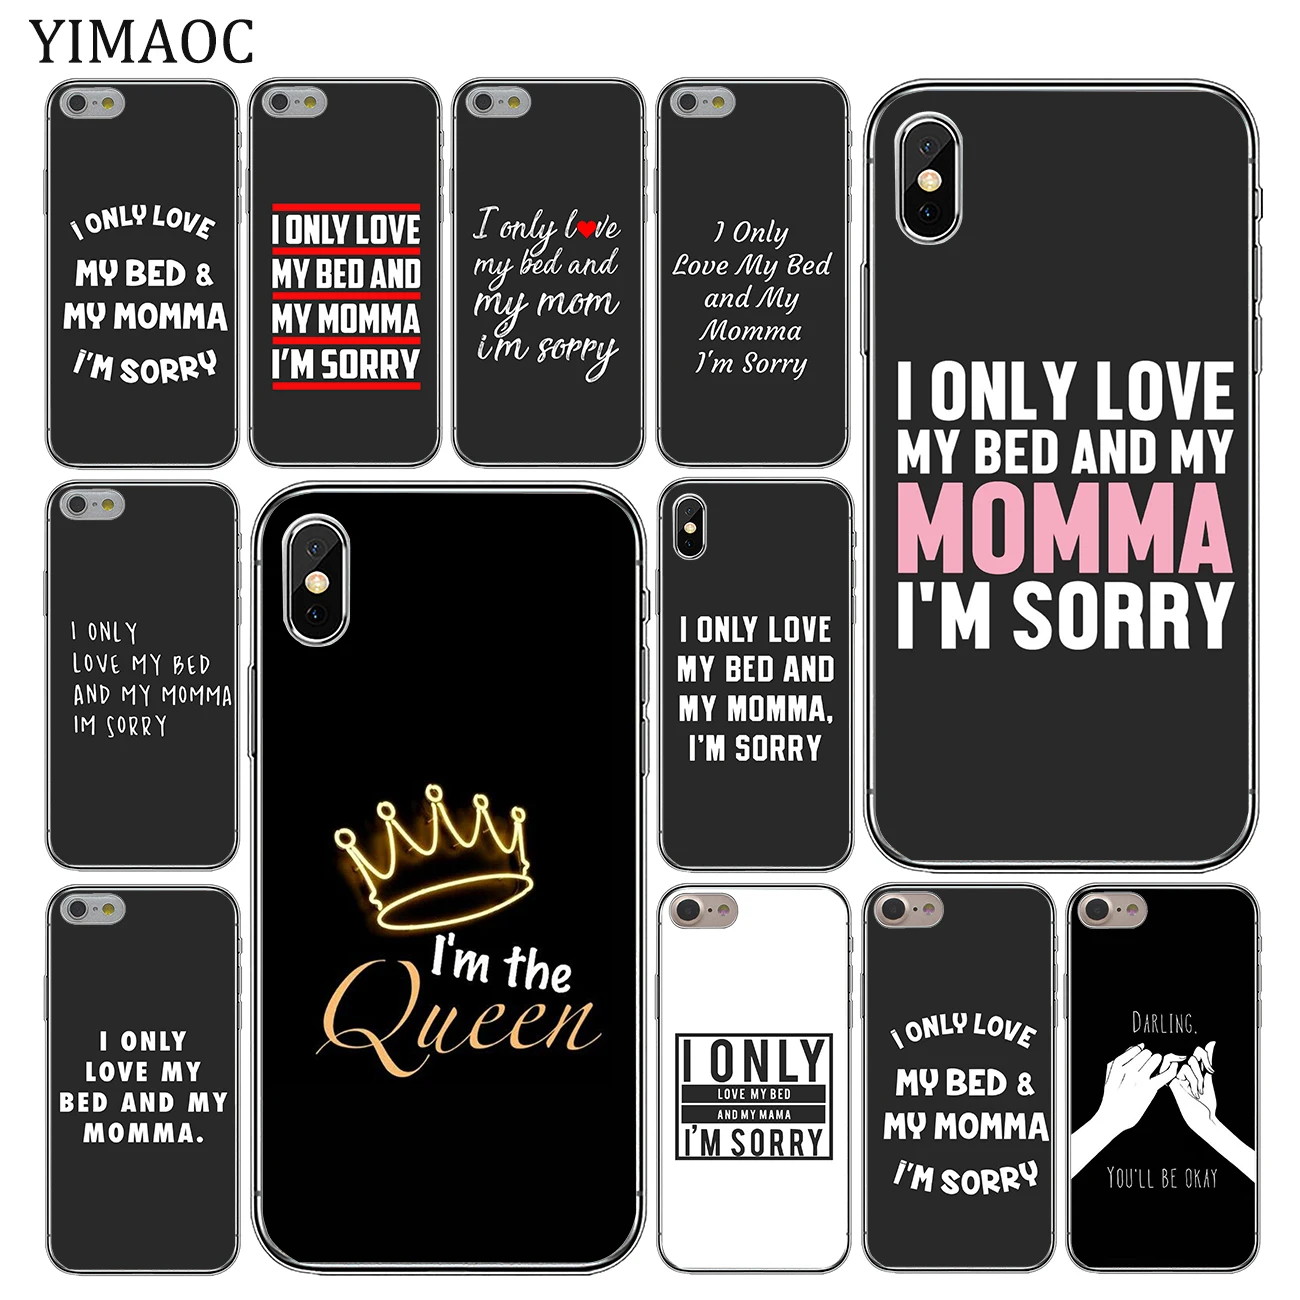 

YIMAOC I Only Love My Bed And My Mama I'm Sorry Soft Silicone Case for iPhone 11 Pro X XR XS Max 6 6S 7 8 Plus 5 5S SE 10 Cover